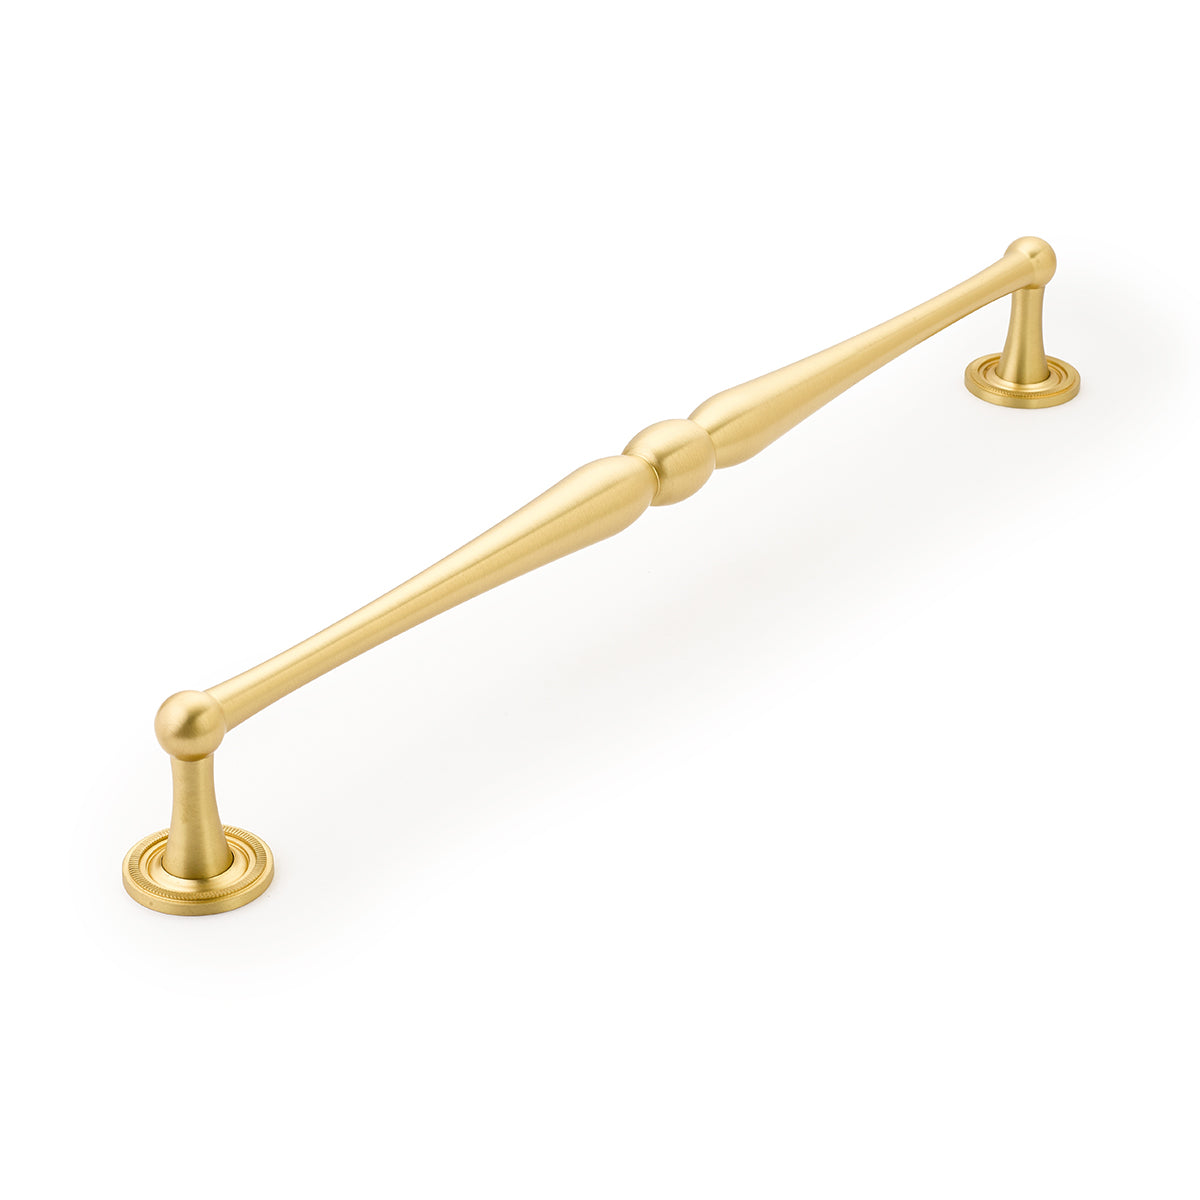 15 3/4 Inch (15 Inch c-c) Atherton Appliance Pull with Knurled Footplates (Satin Brass Finish)